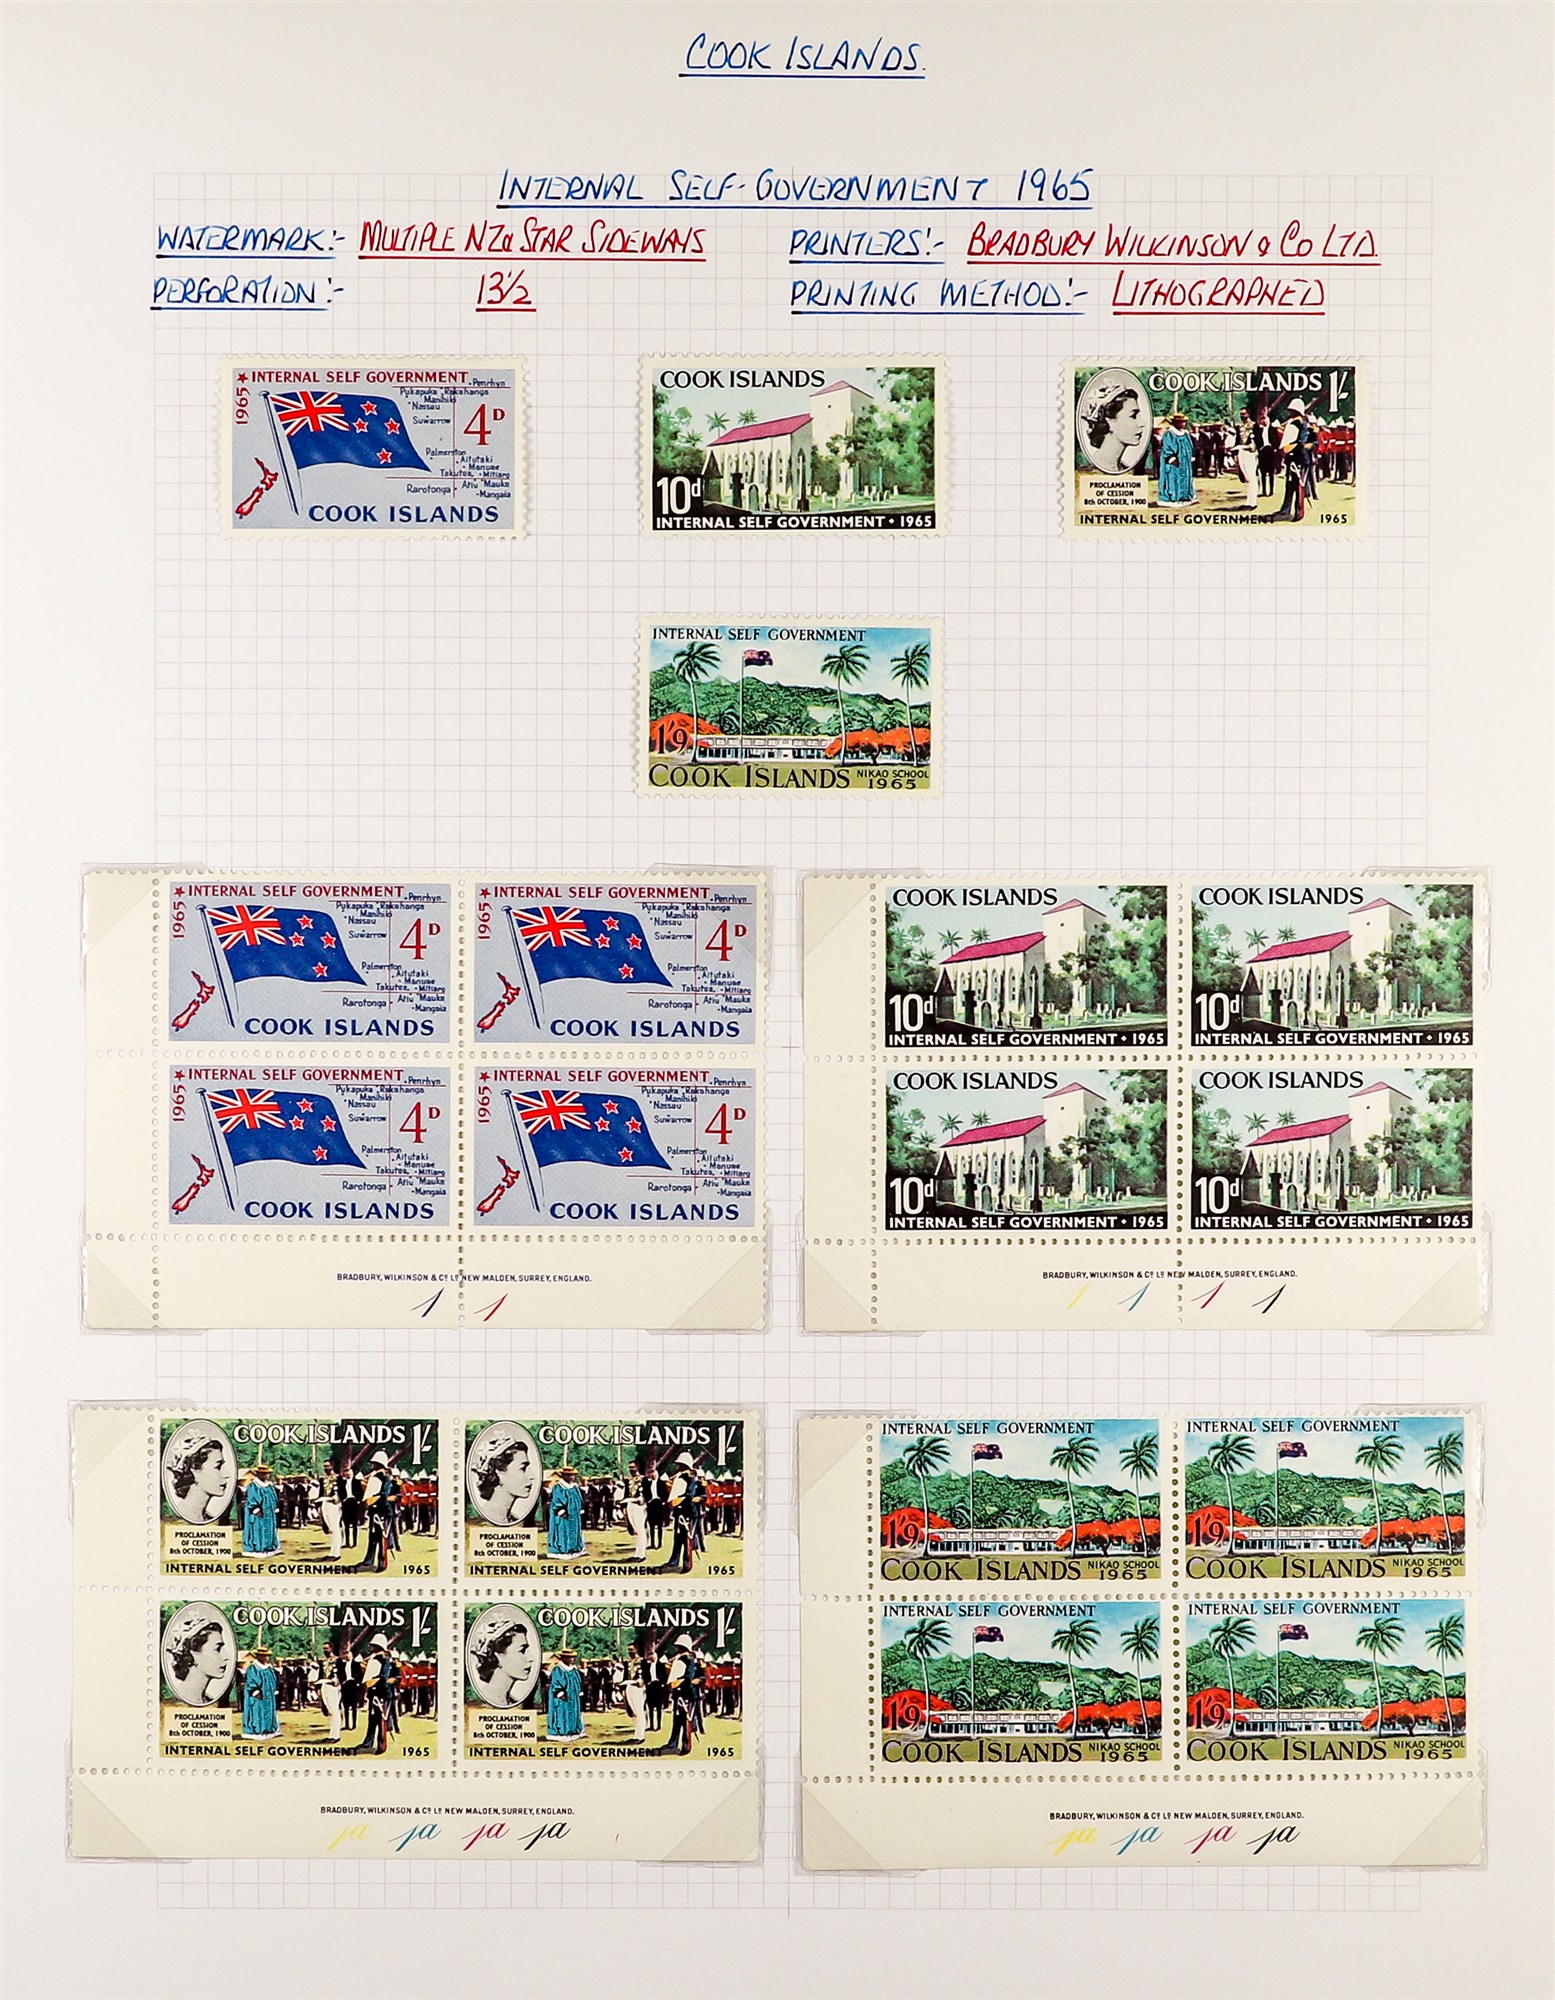 COOK IS. 1953 - 2000 COLLECTION. A rather beautiful (in our opinion!) collection of mint & never